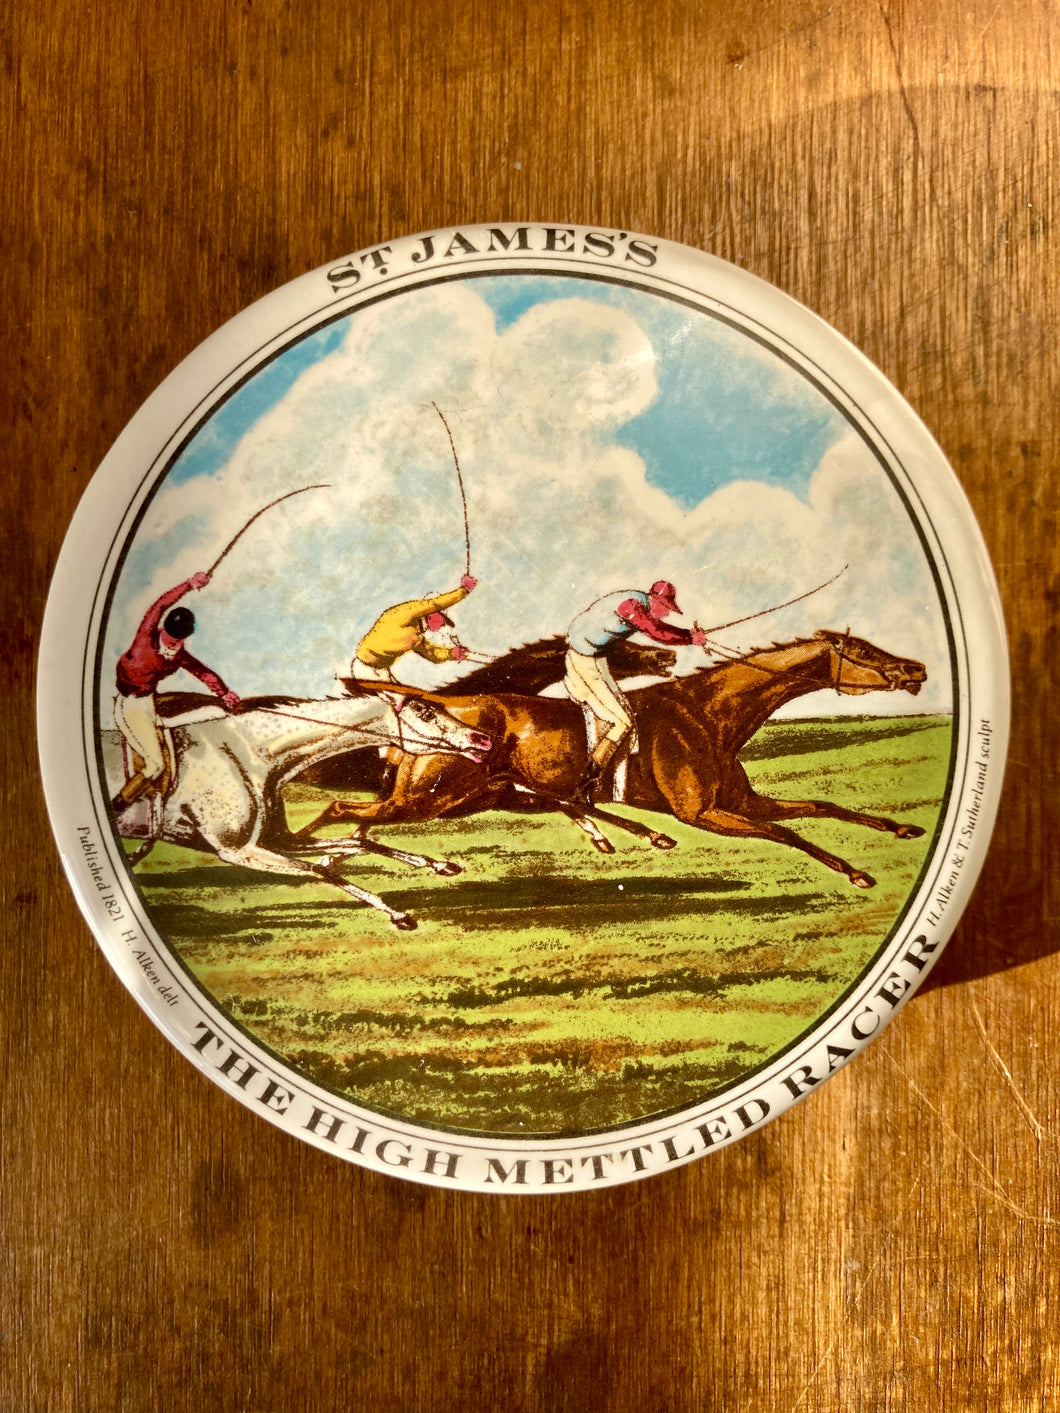 St. James's The High Mettled Racer relish pot lid